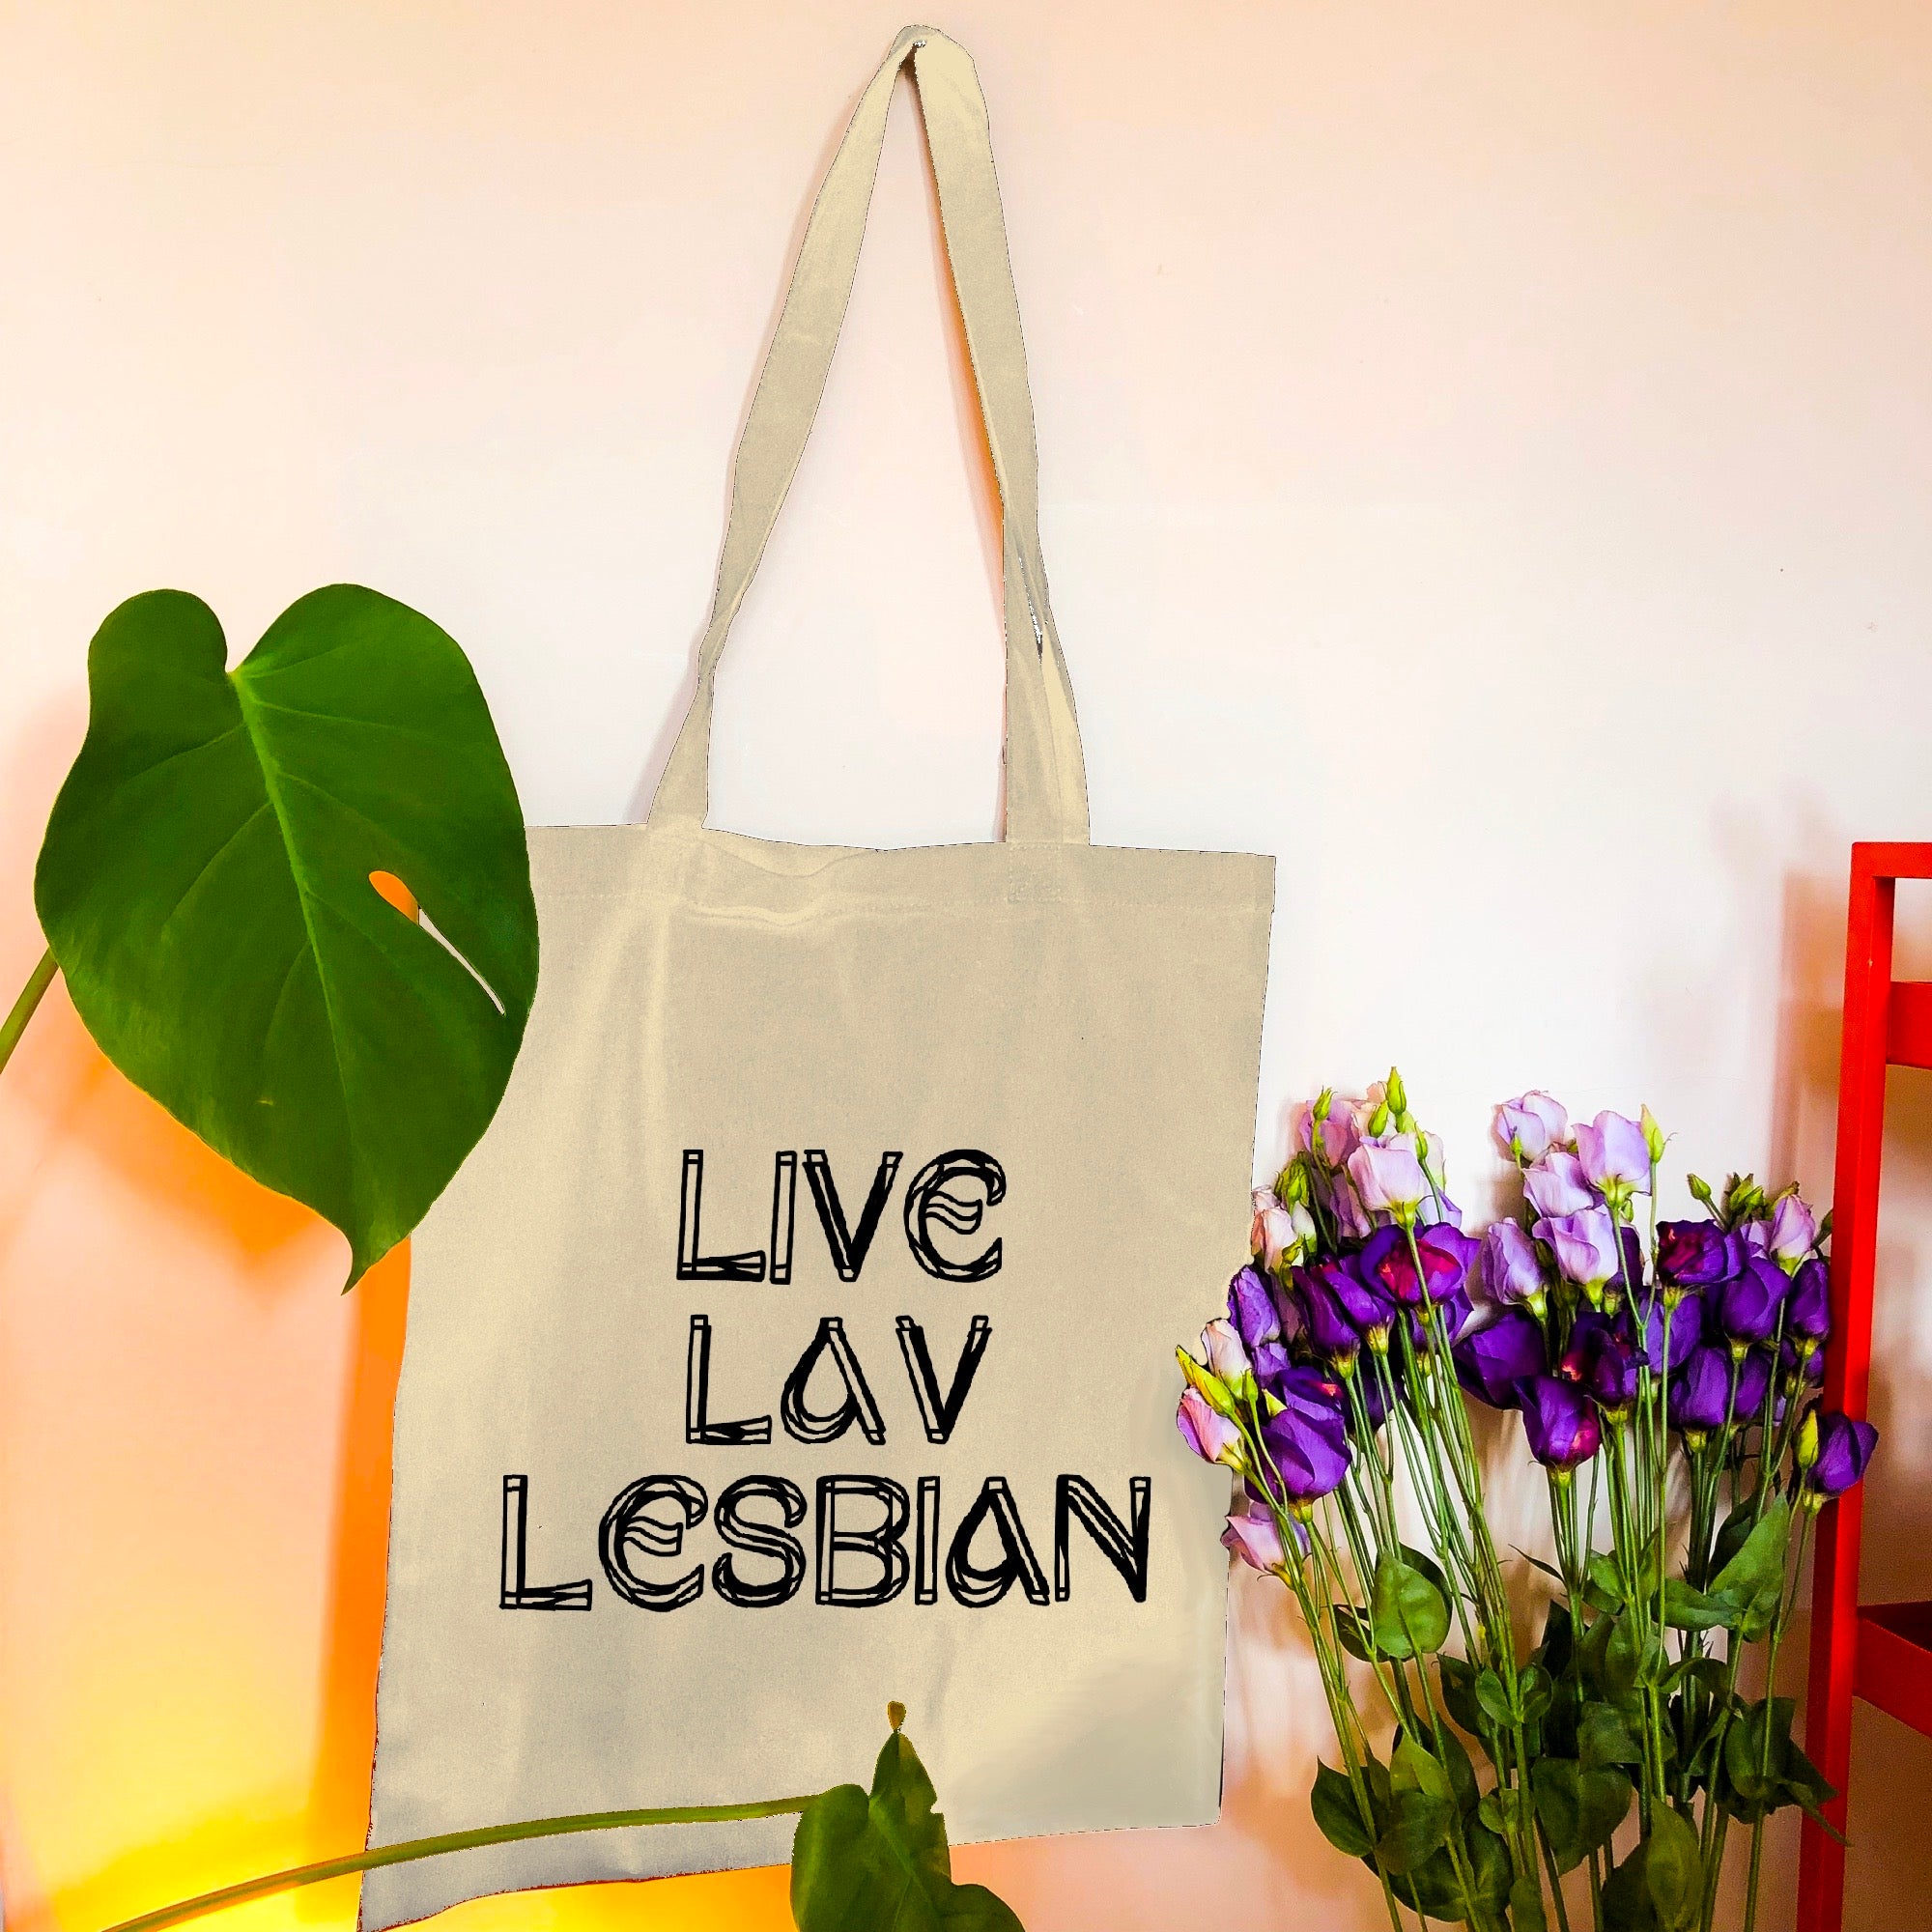 Amazon.com: shakevision yell lav Tote Bag : Clothing, Shoes & Jewelry